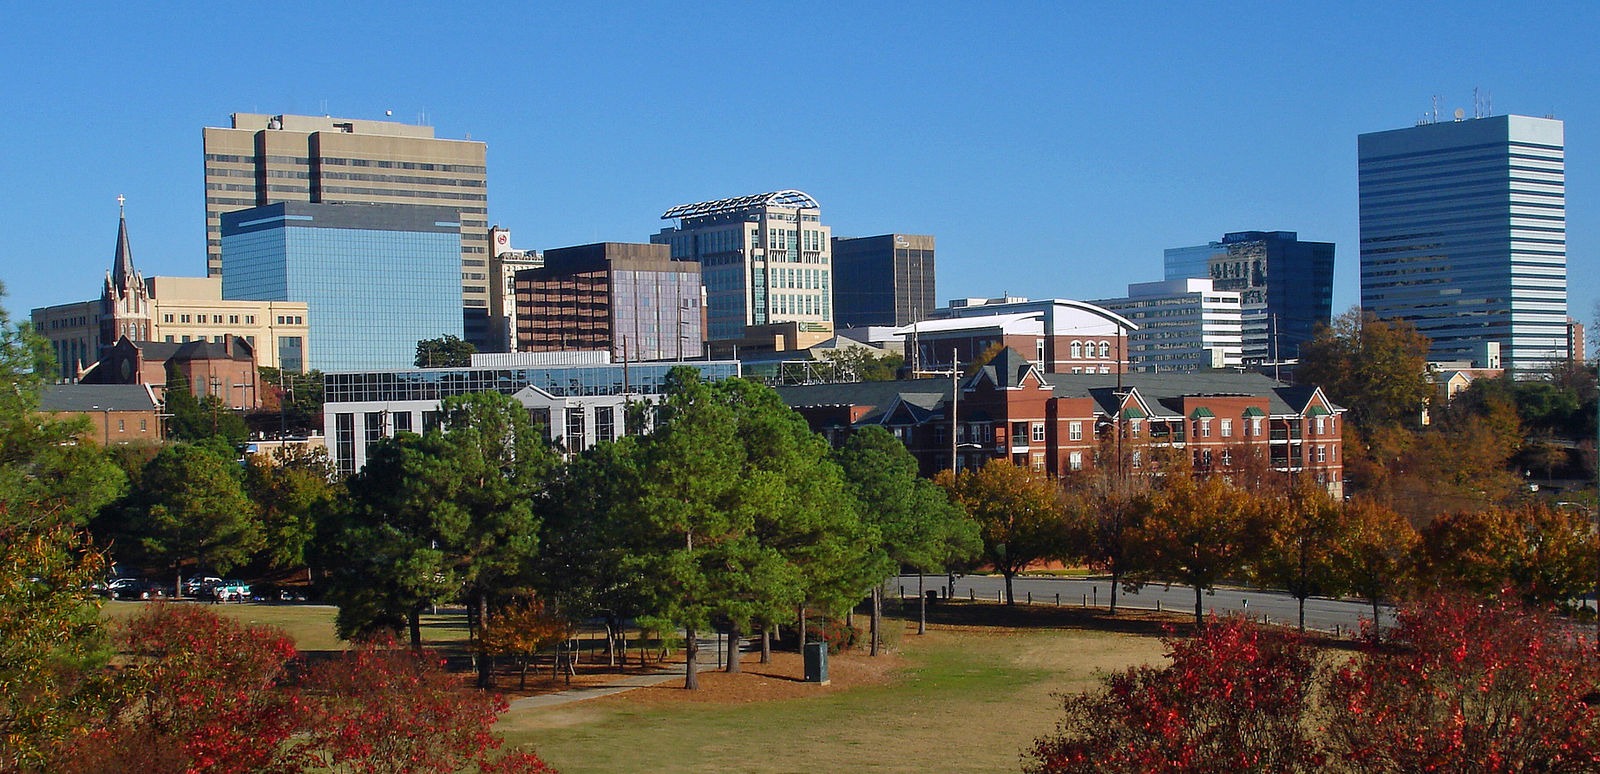 1600px-Fall_skyline_of_Columbia_SC_from_Arsenal_Hill.jpg